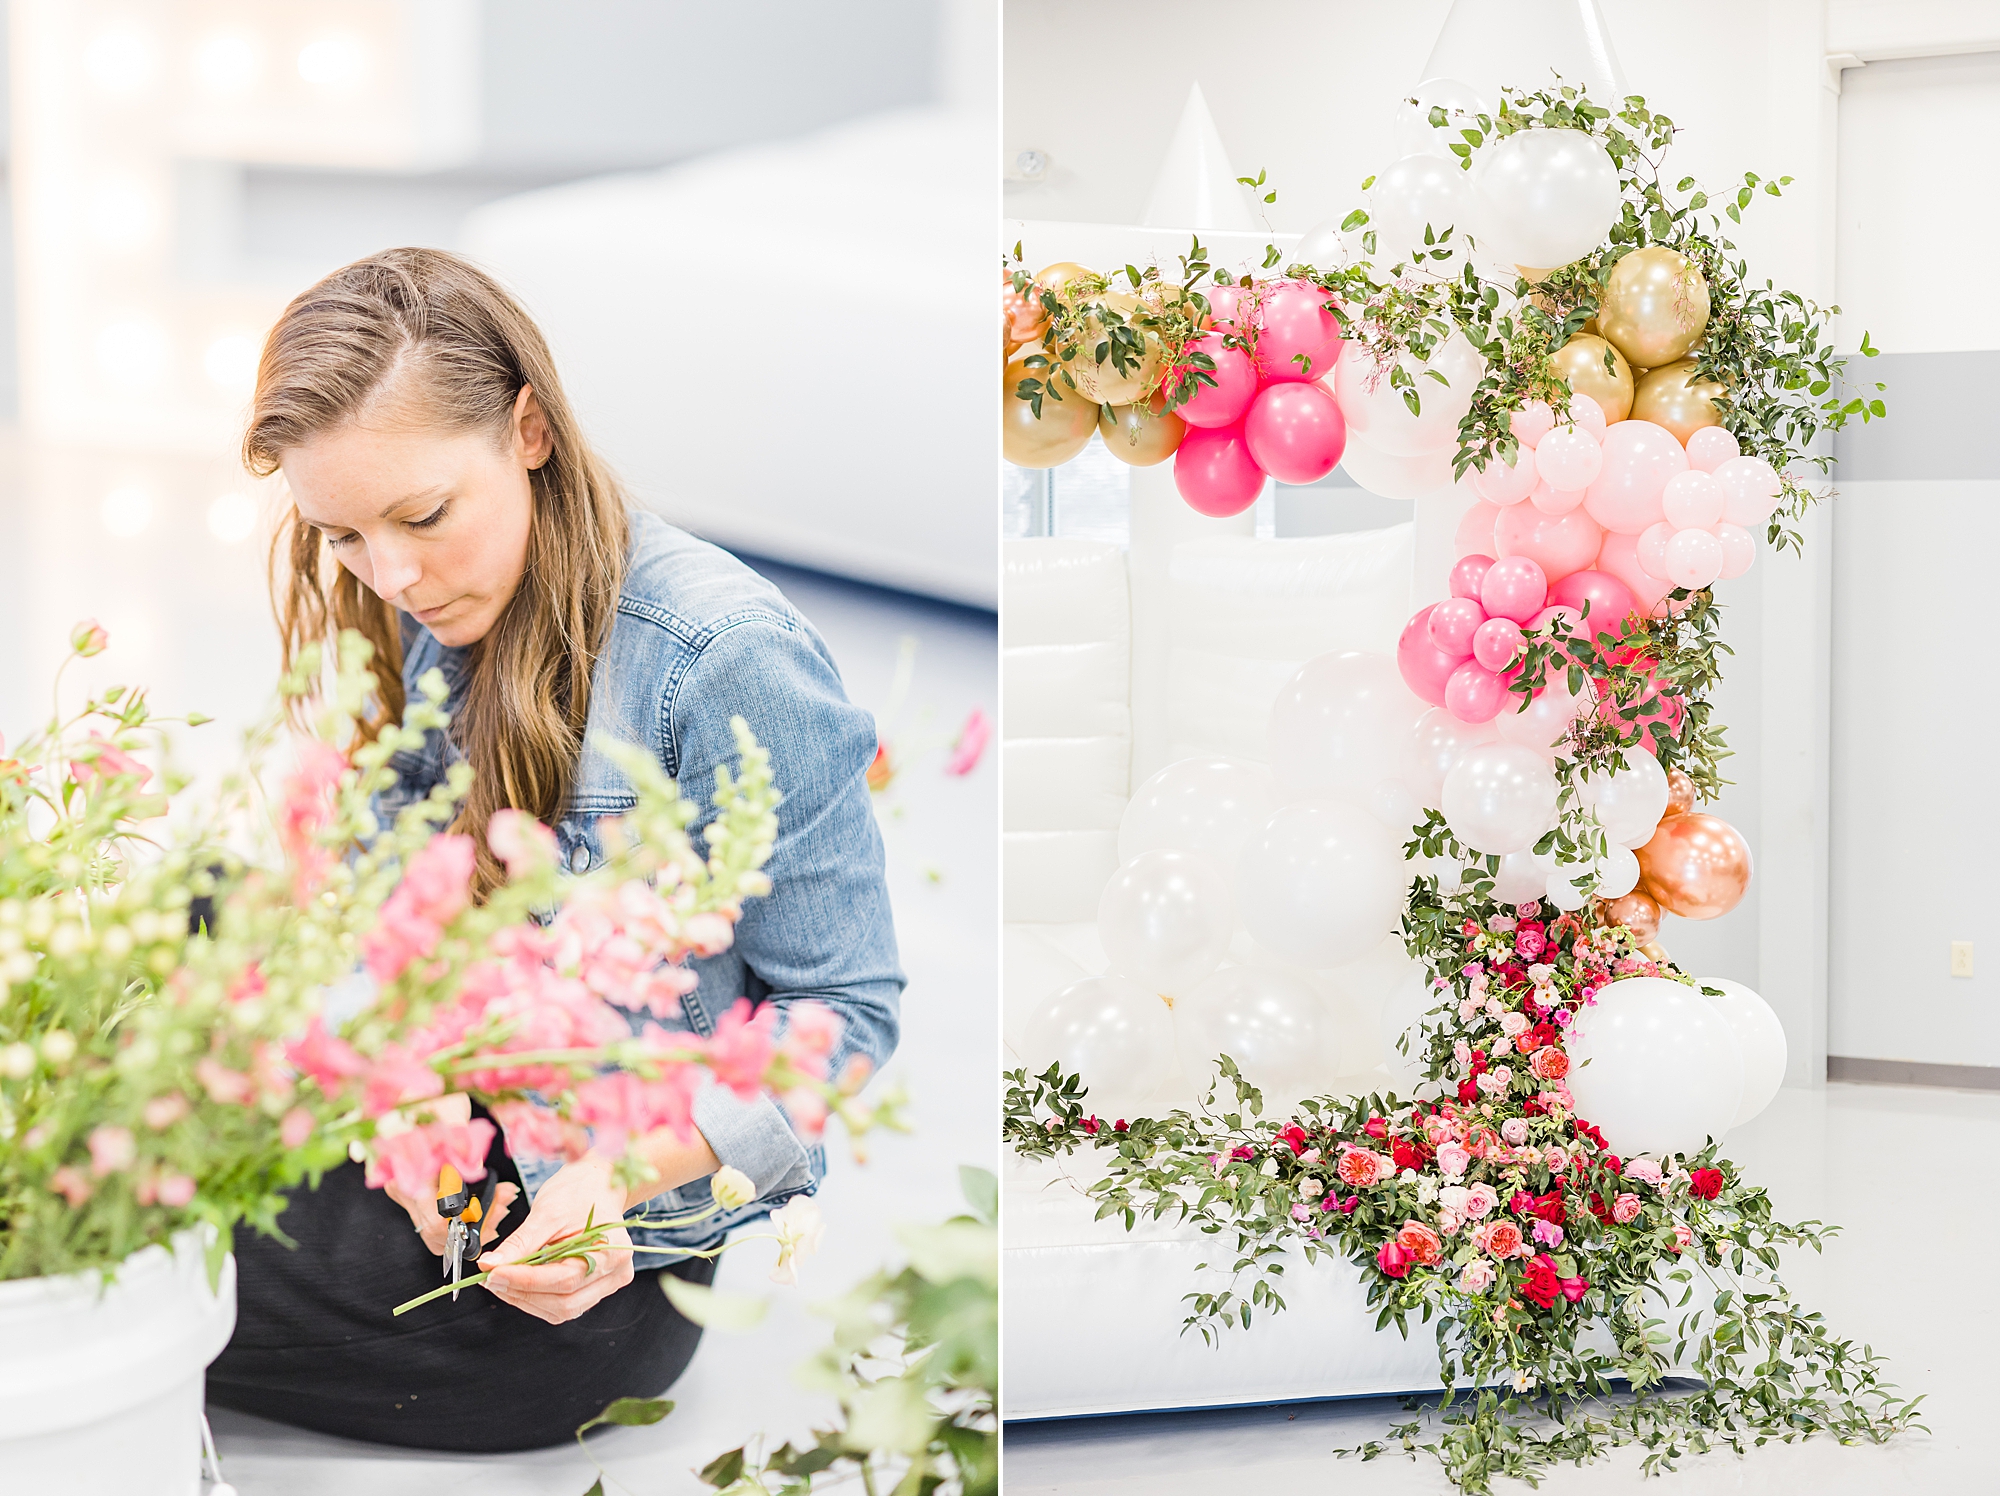 woman sets up floral display for spring wedding